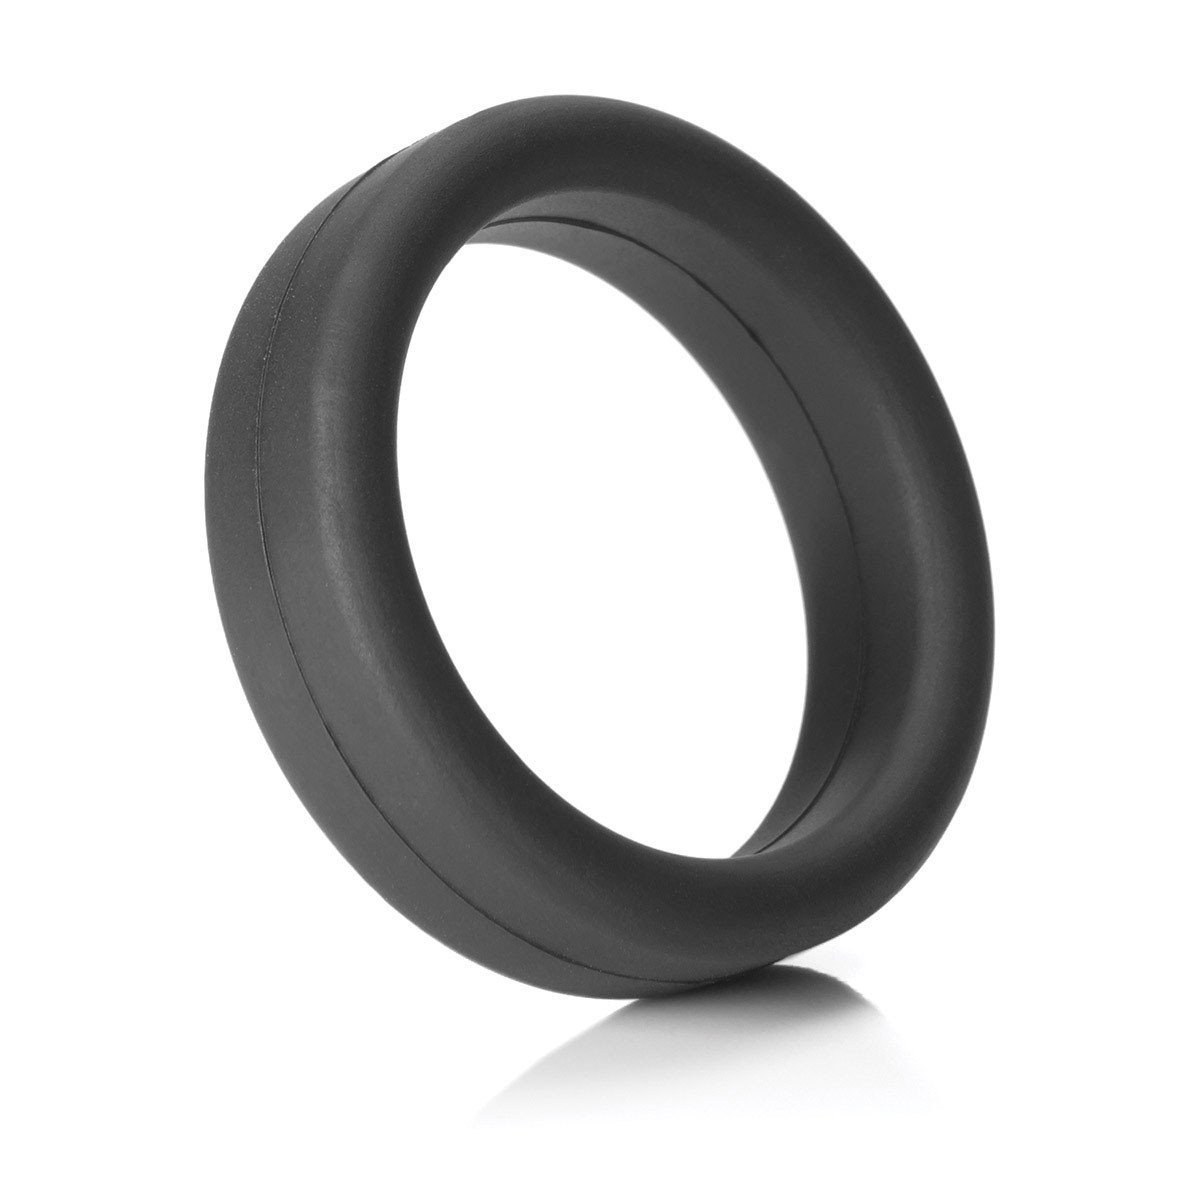 SuperSoft Silicone C-Ring free shipping - Beyond Delights